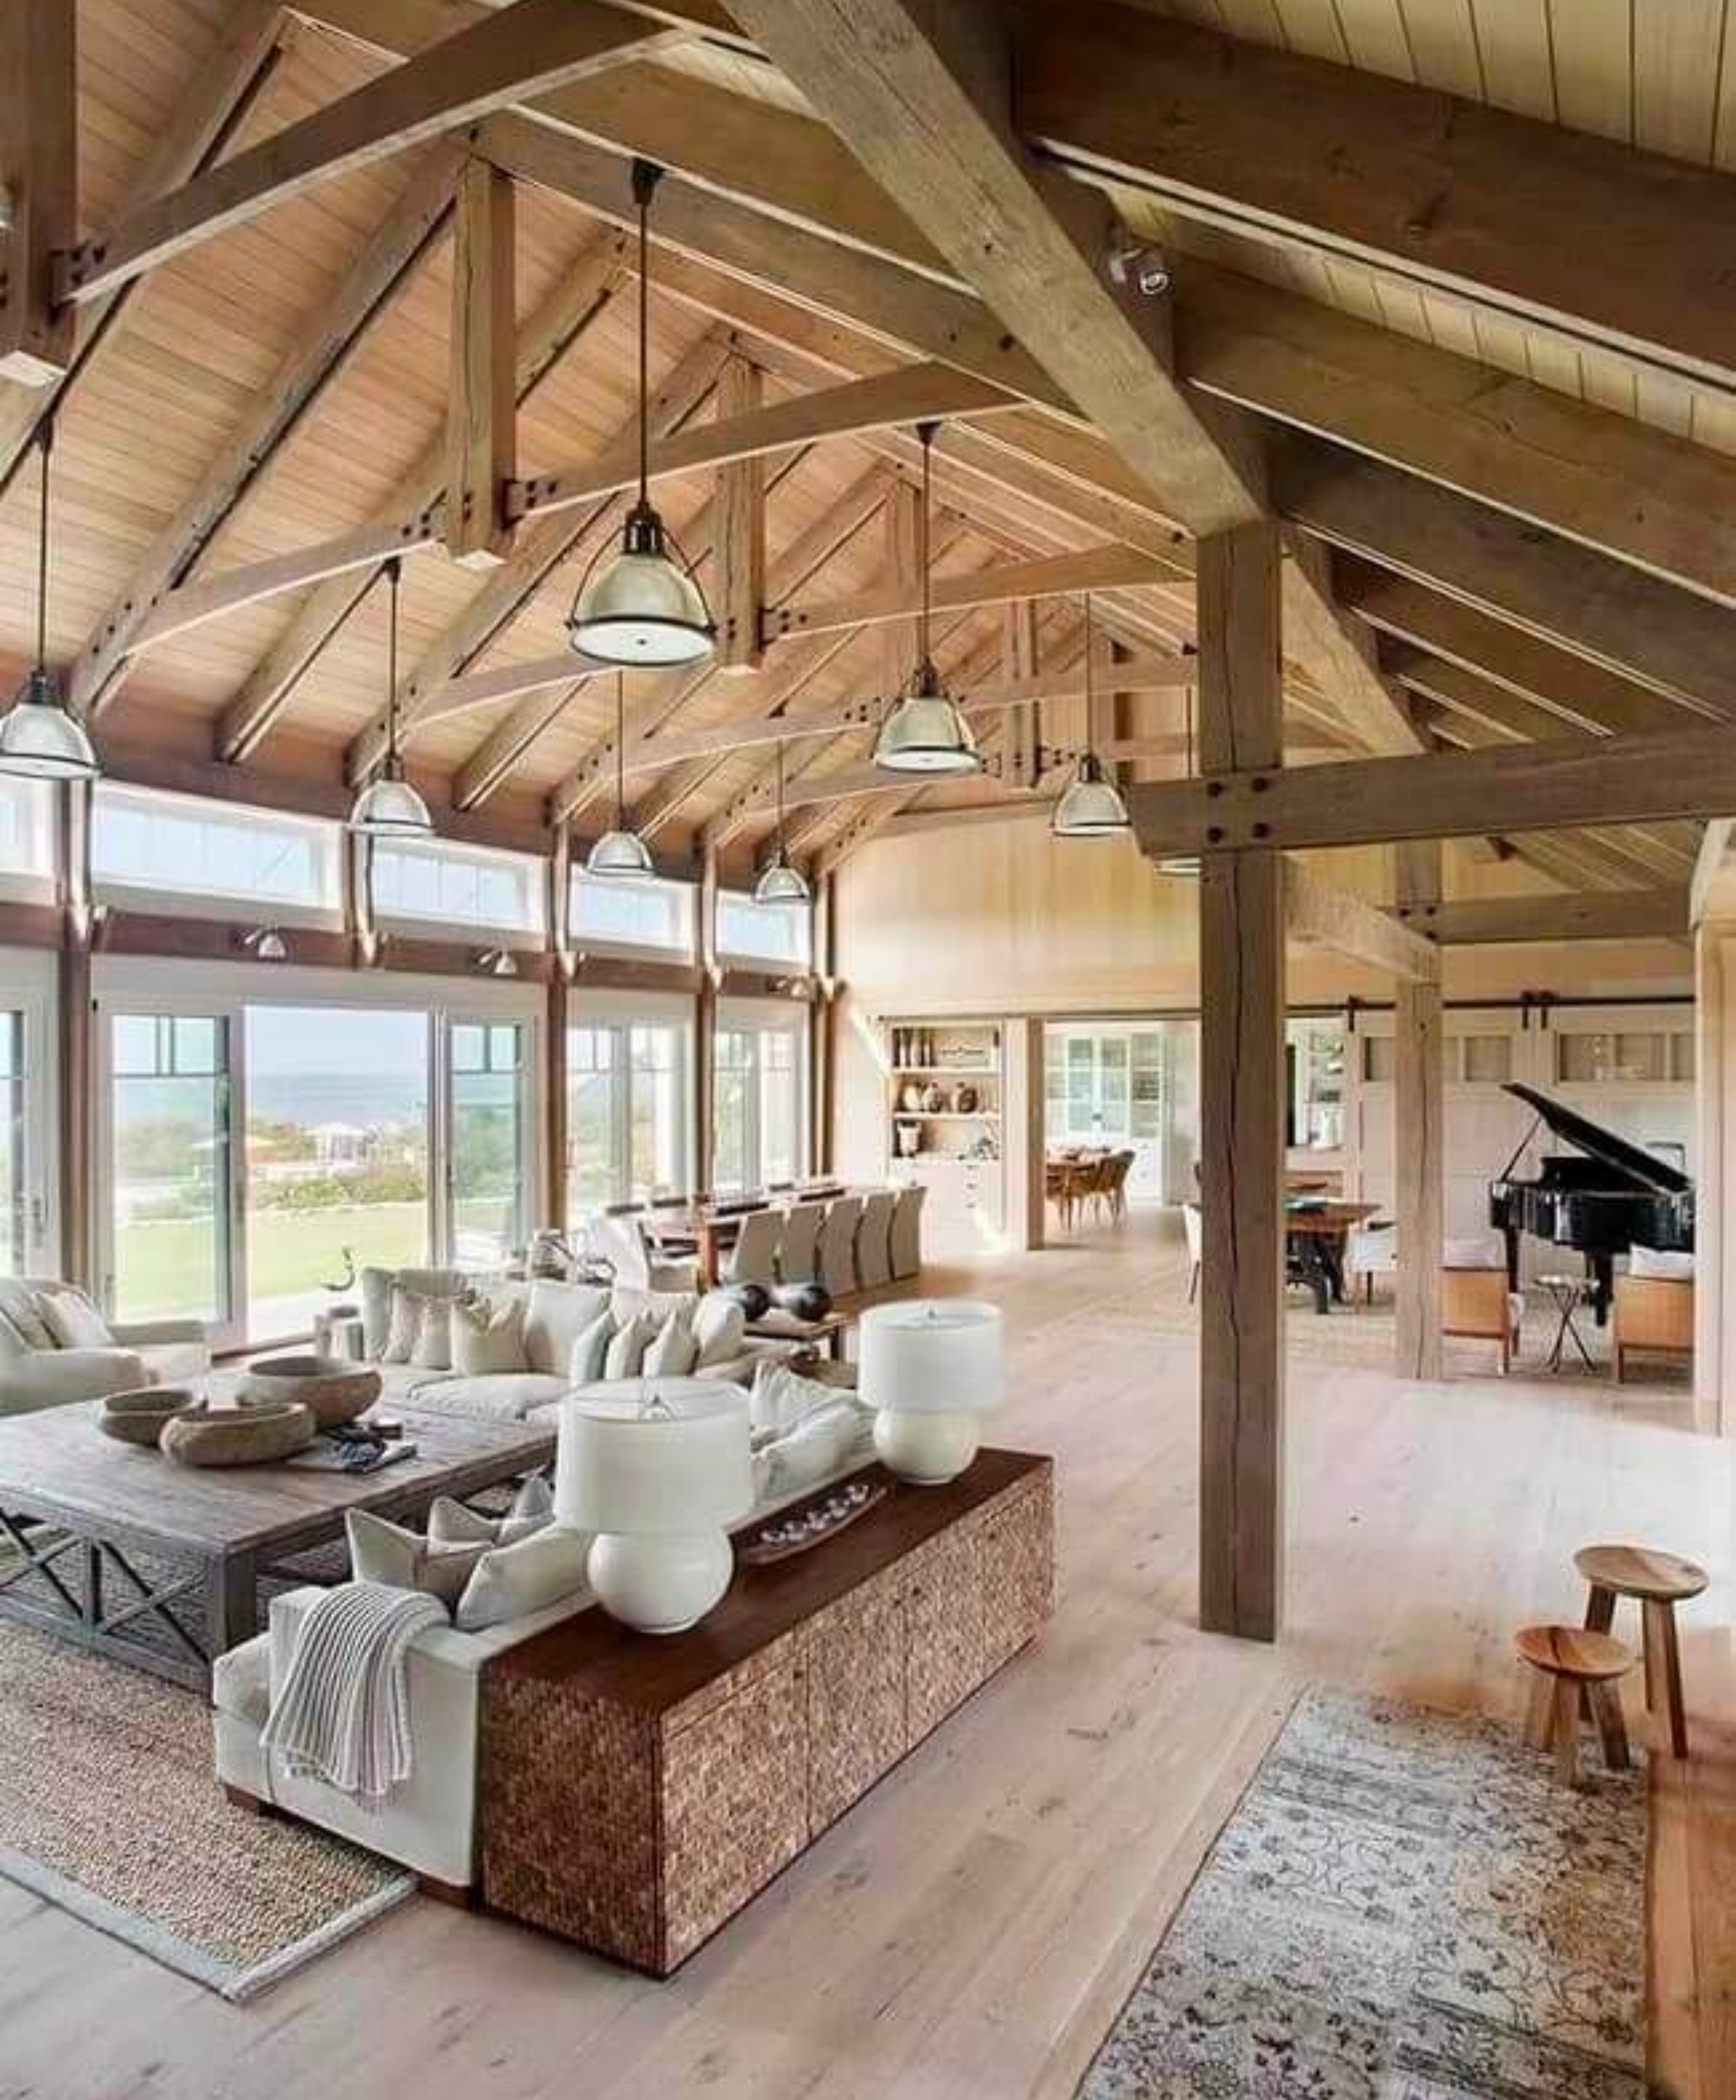 Large Barndominium Interior with living area, dining room, grand piano, and kitchen area. Sliding doors are slow shown leading out to a large deck and back yard